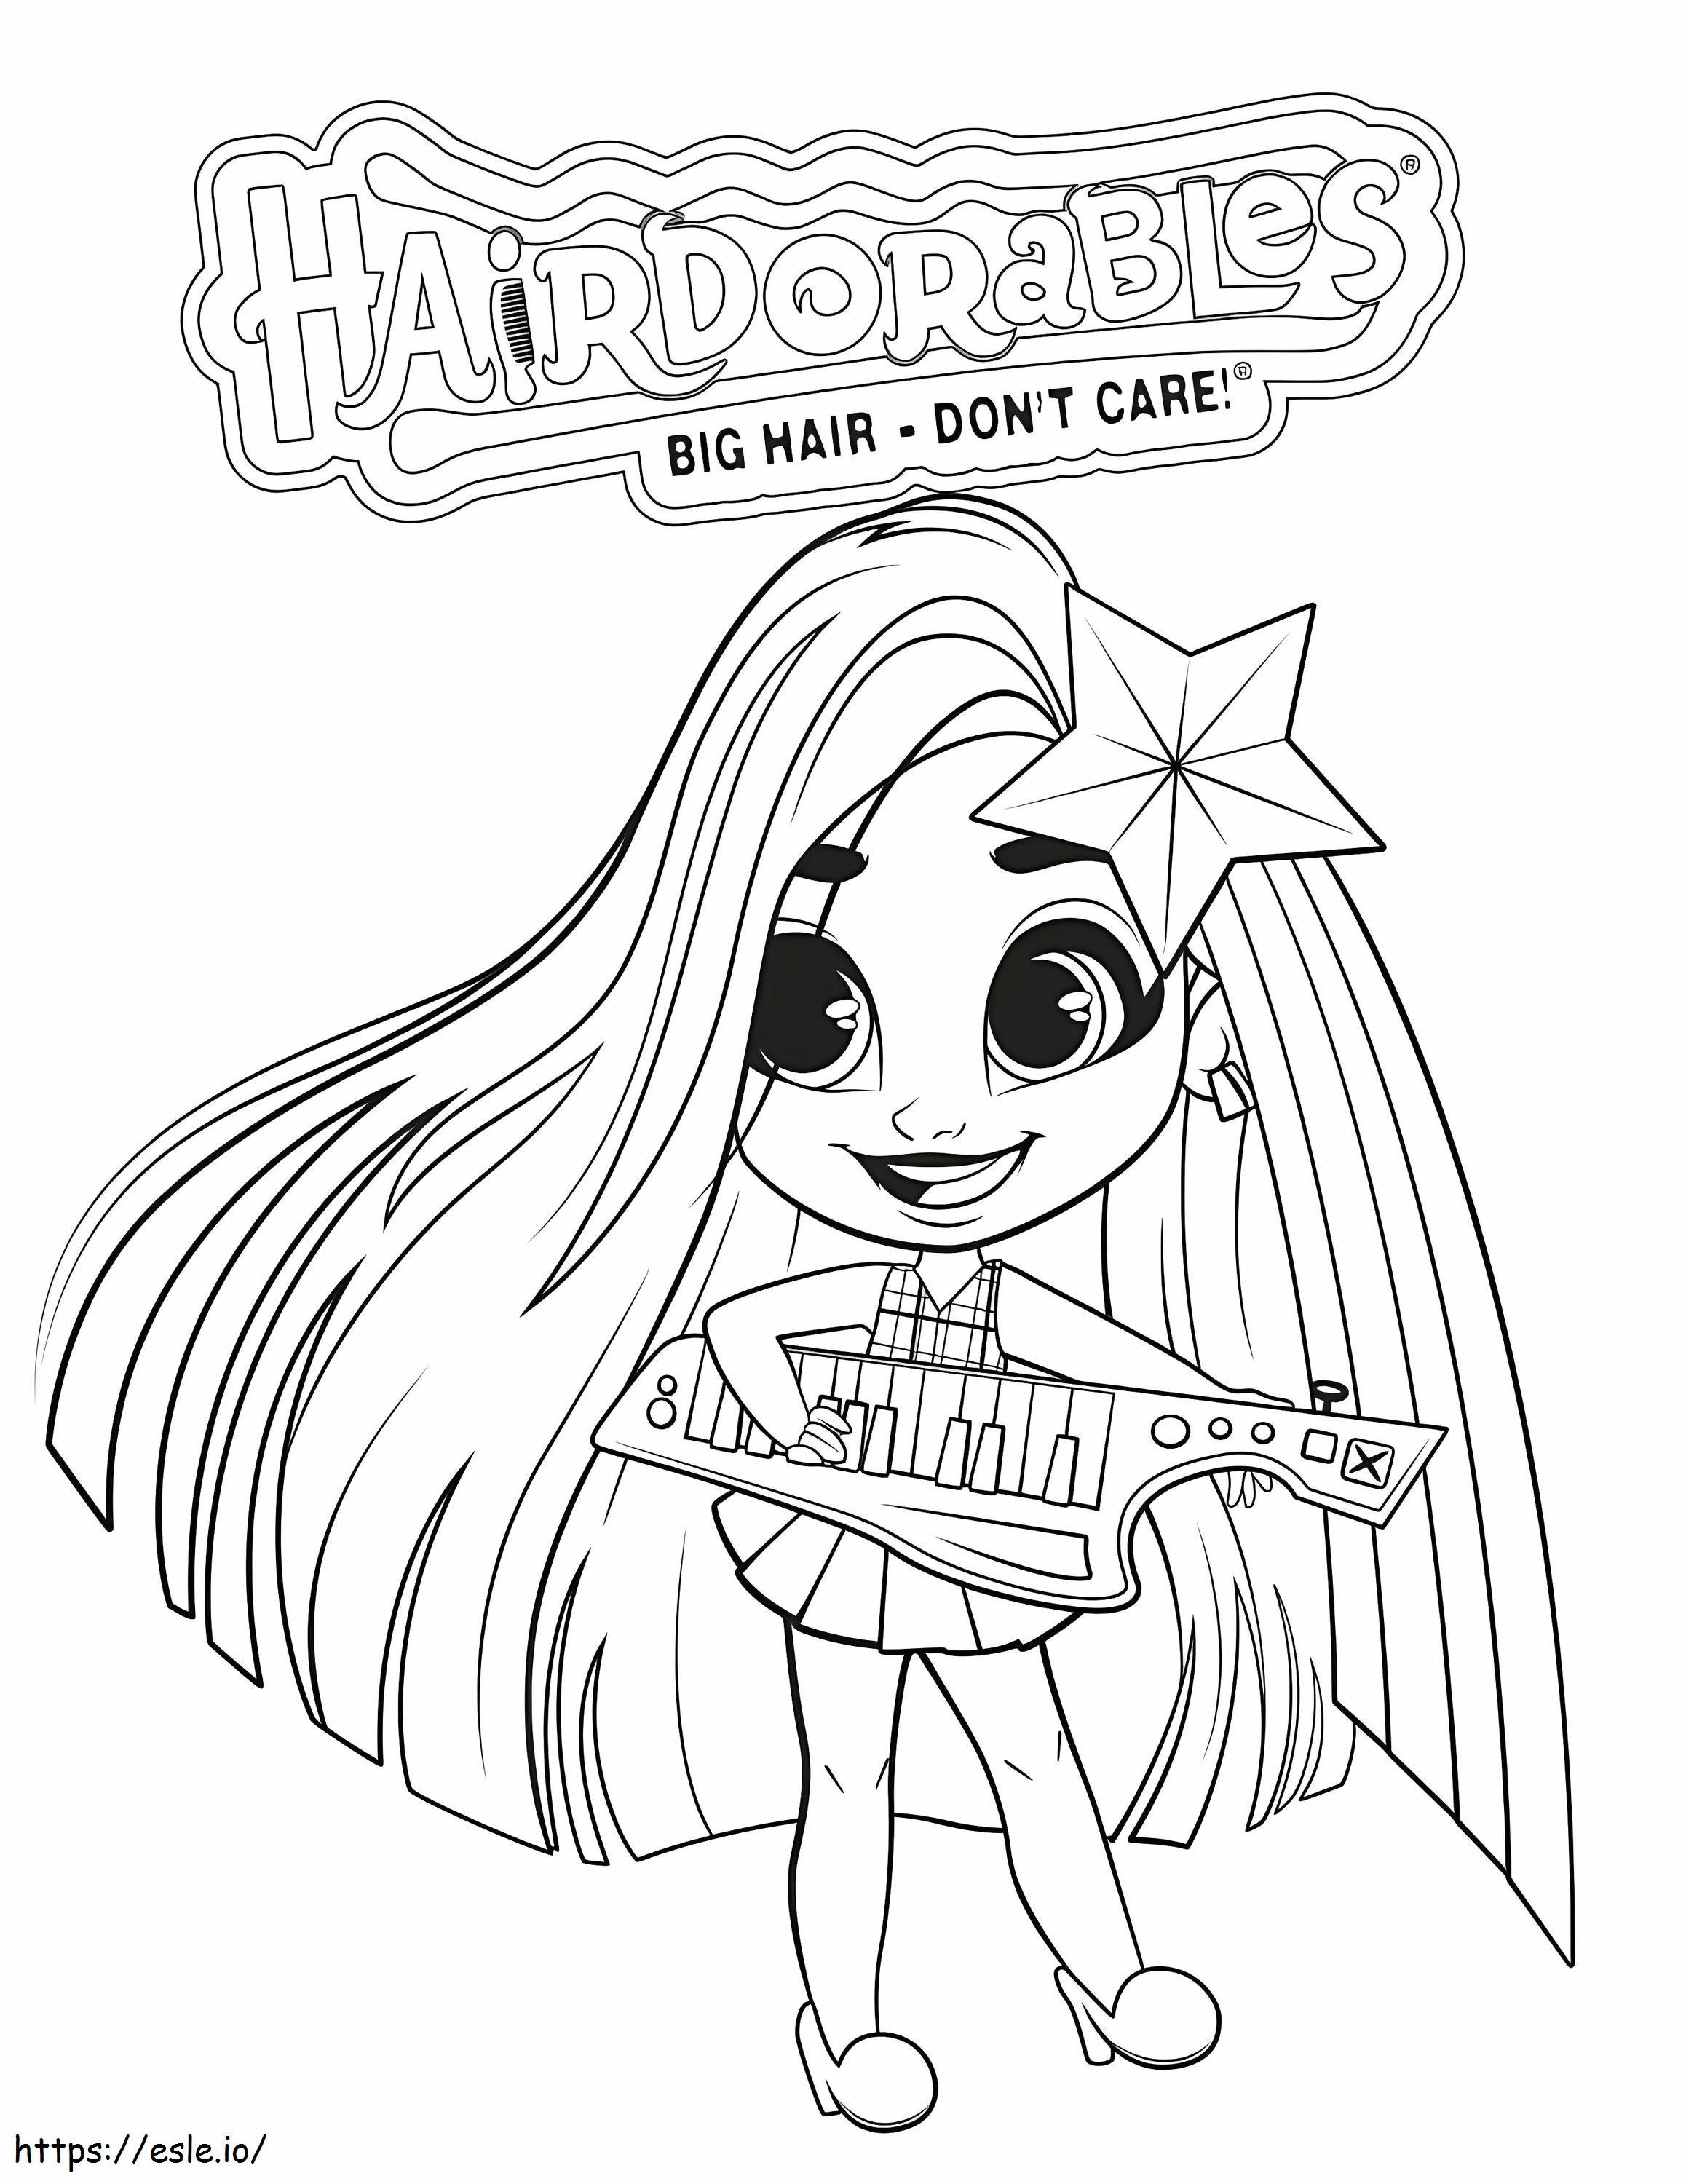 Pretty Hairdorables coloring page